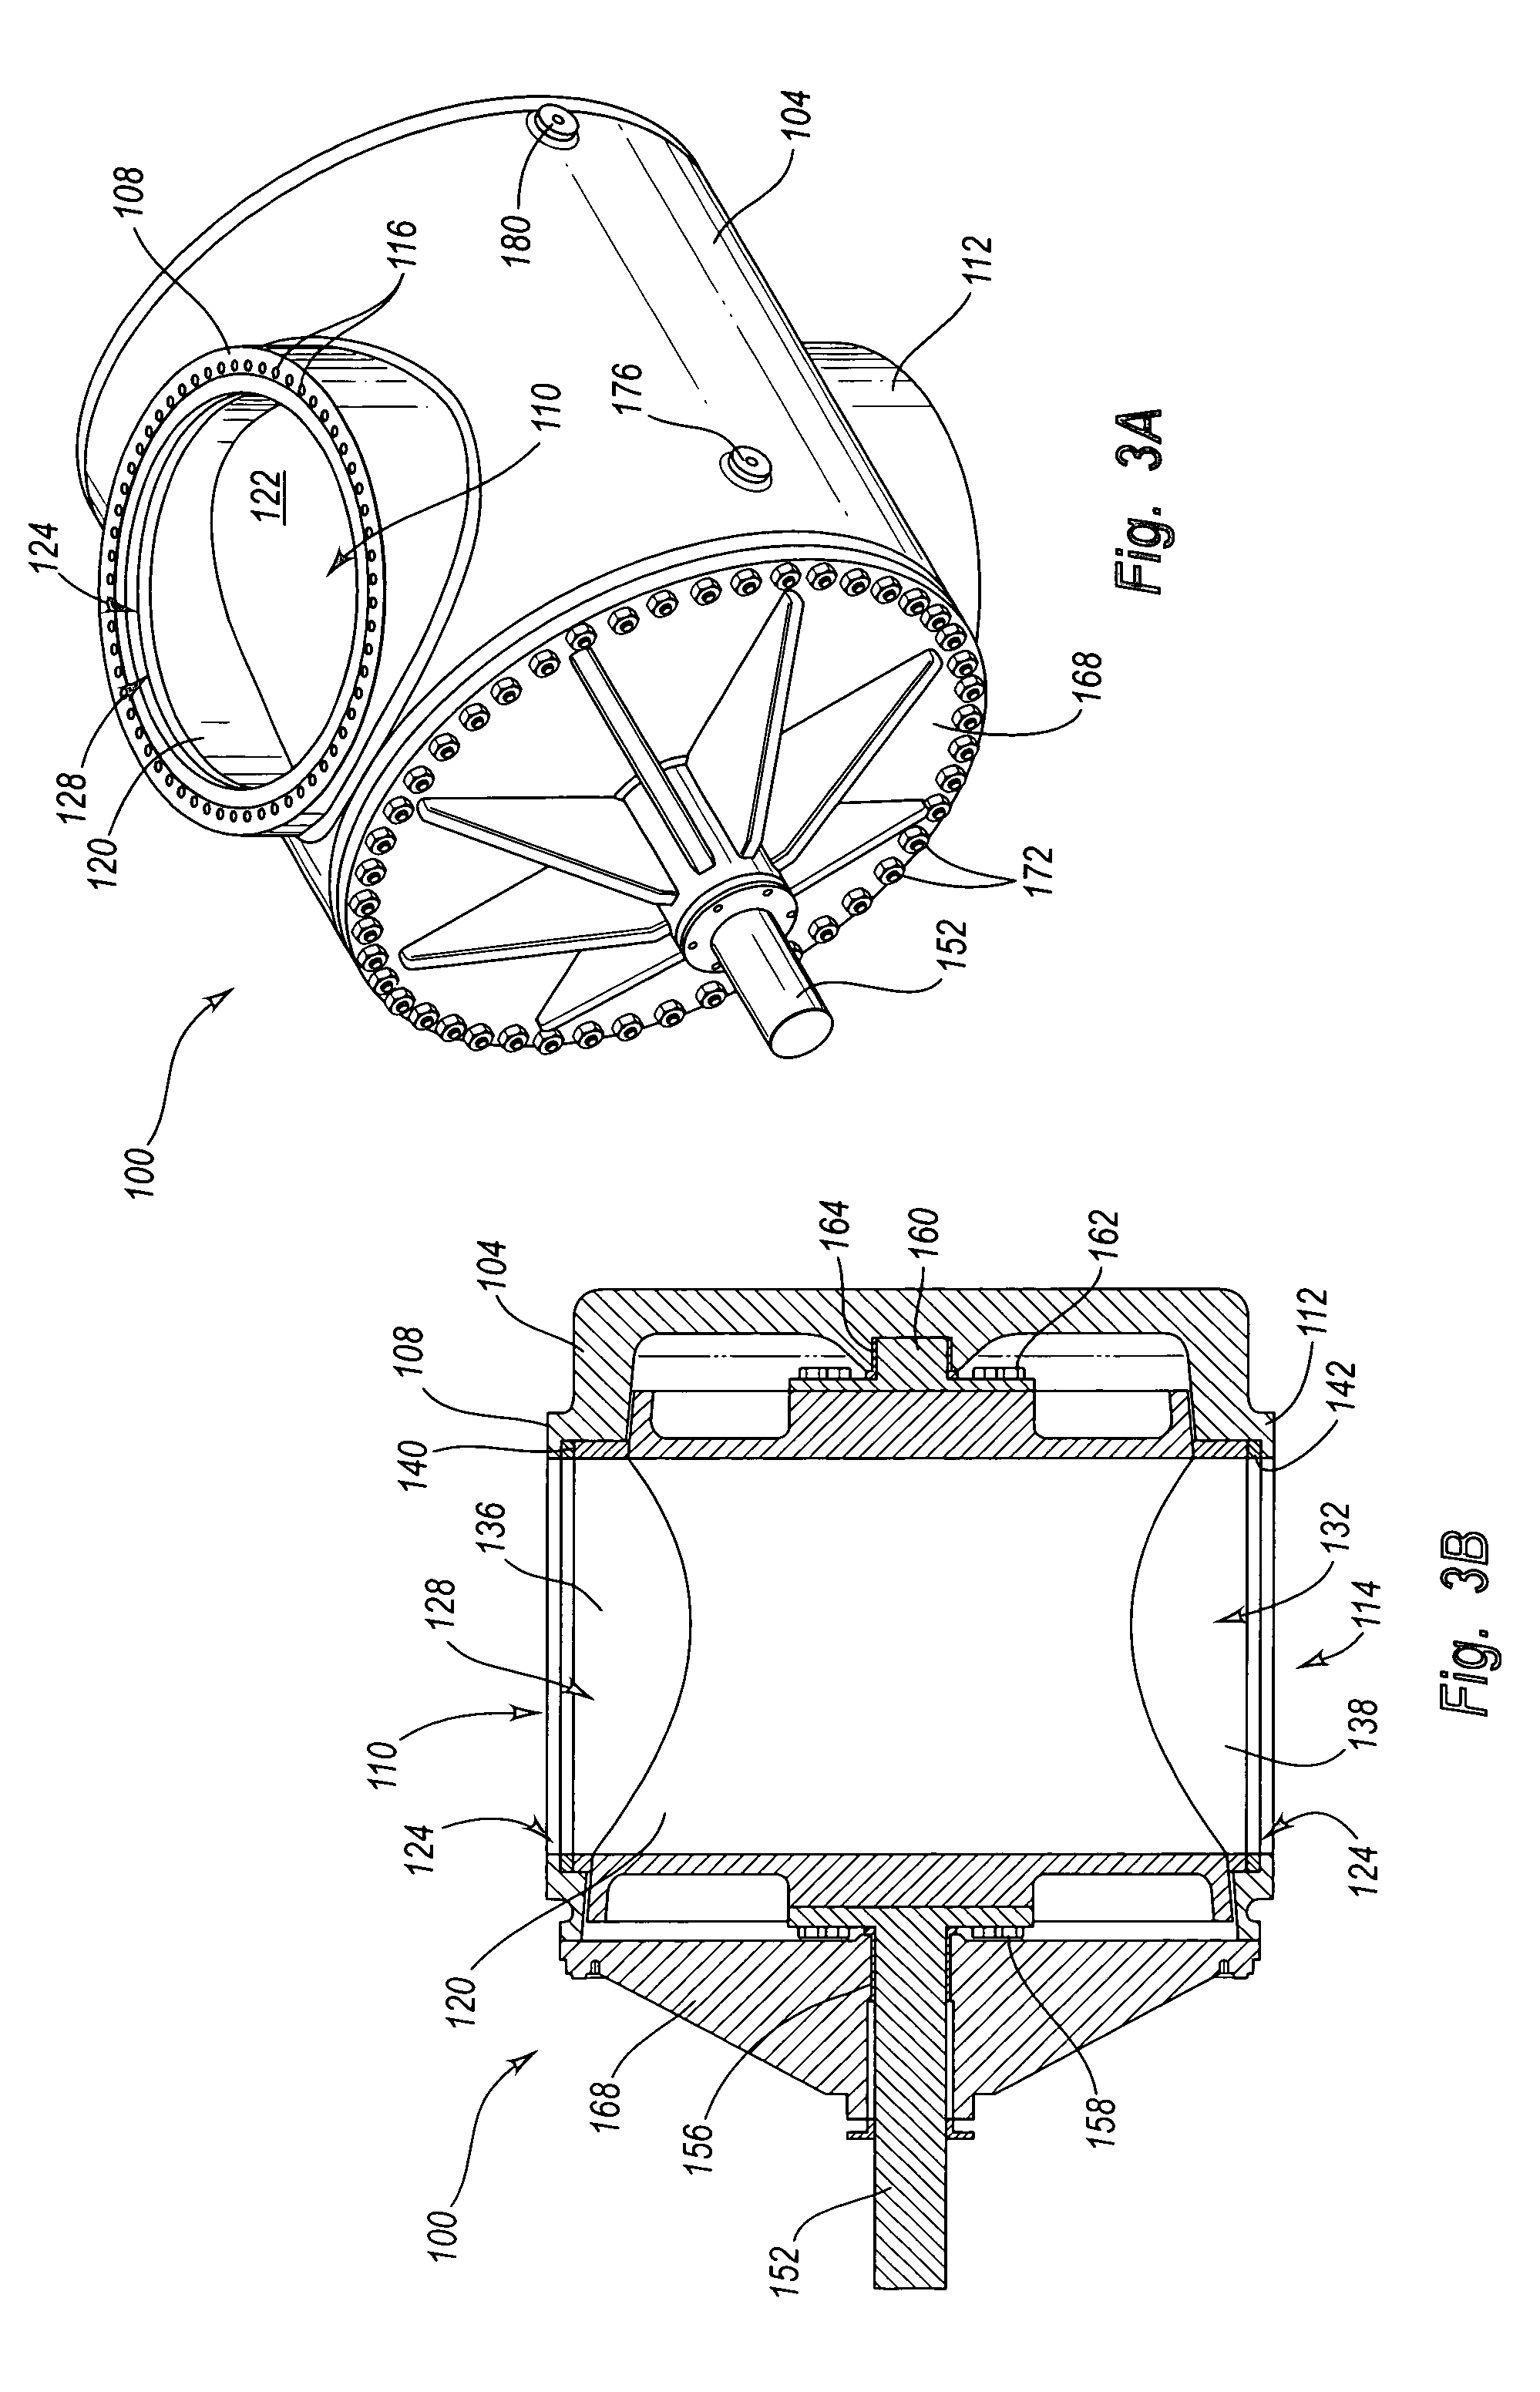 Systems and methods for providing continuous containment of delayed coker unit operations